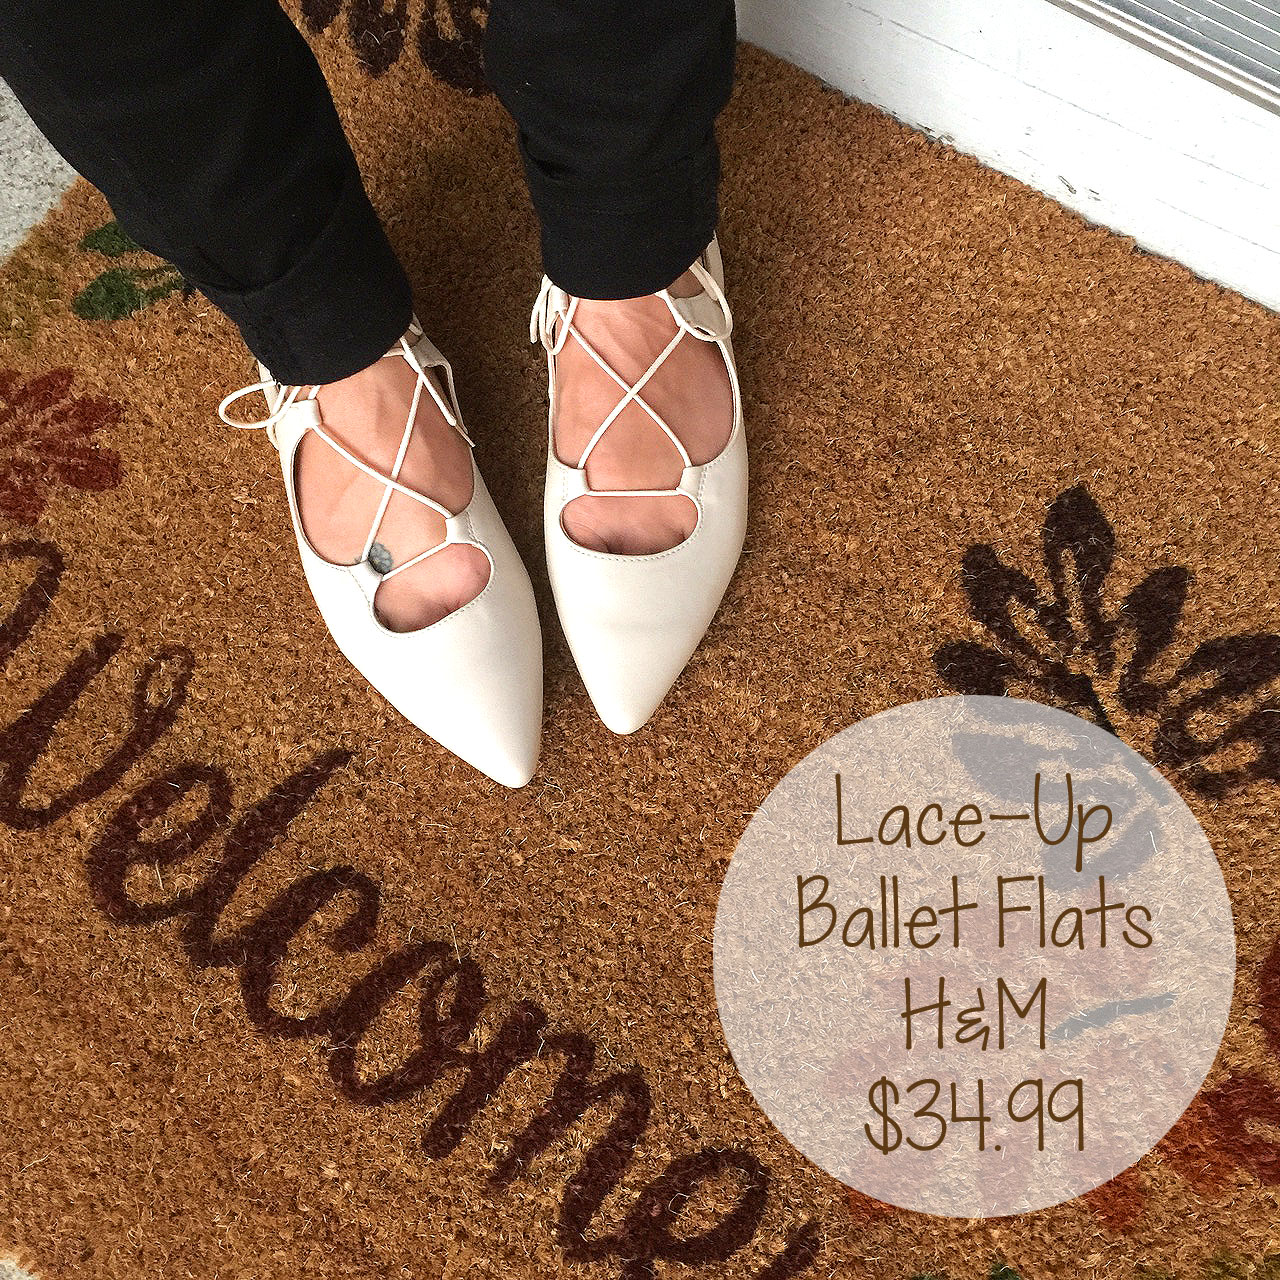 Lace up flats are perfect for all season and are available for any budget